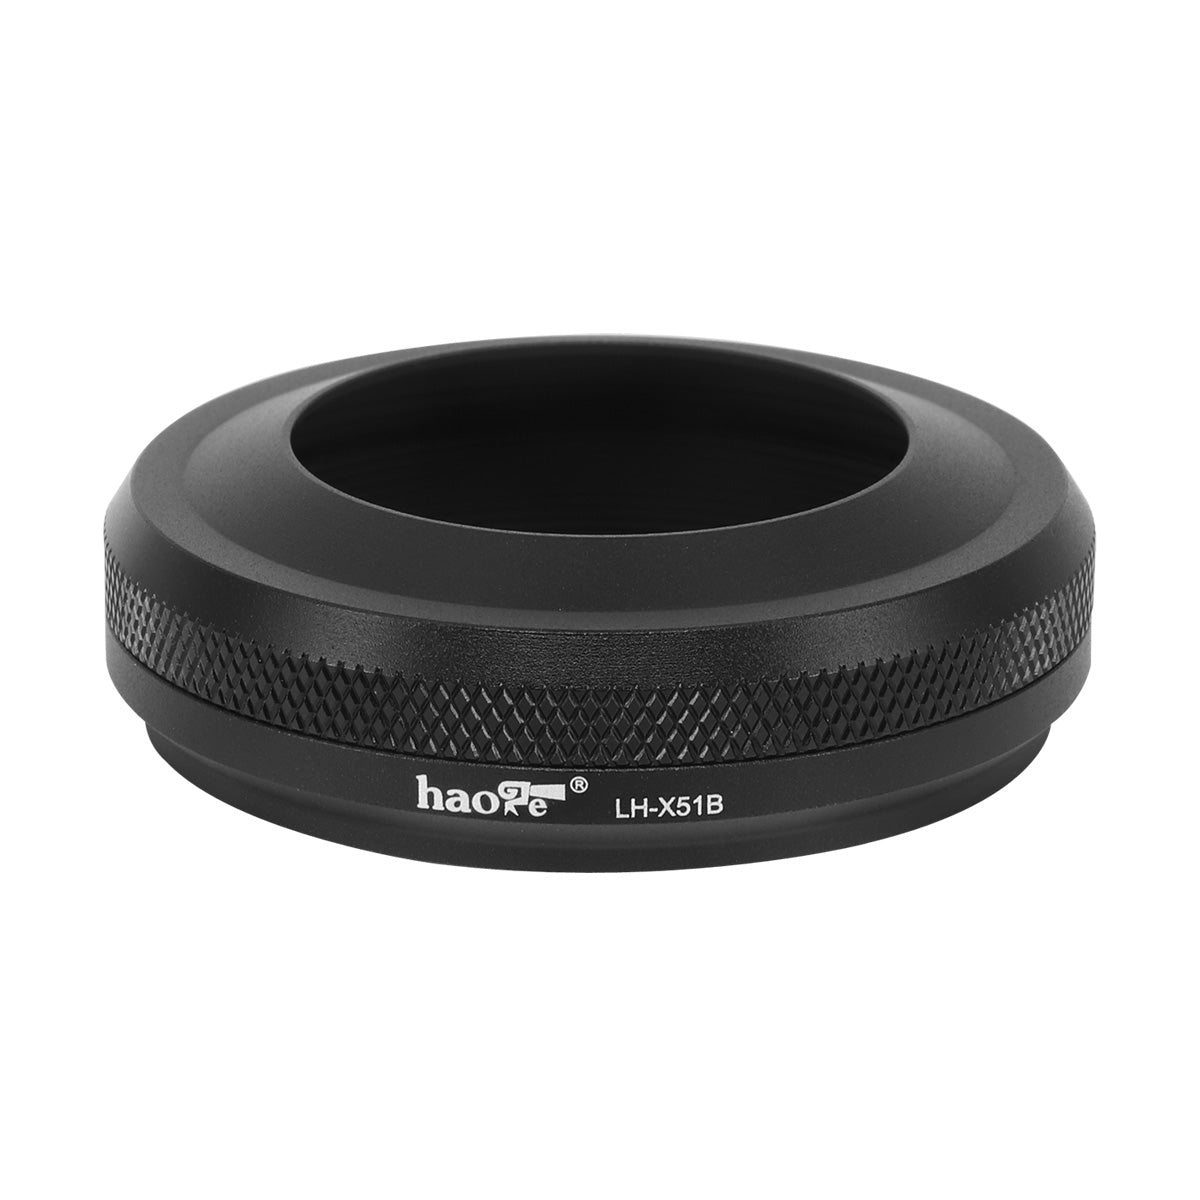 Haoge LH-X51B 2in1 All Metal Ultra-Thin Lens Hood with Adapter